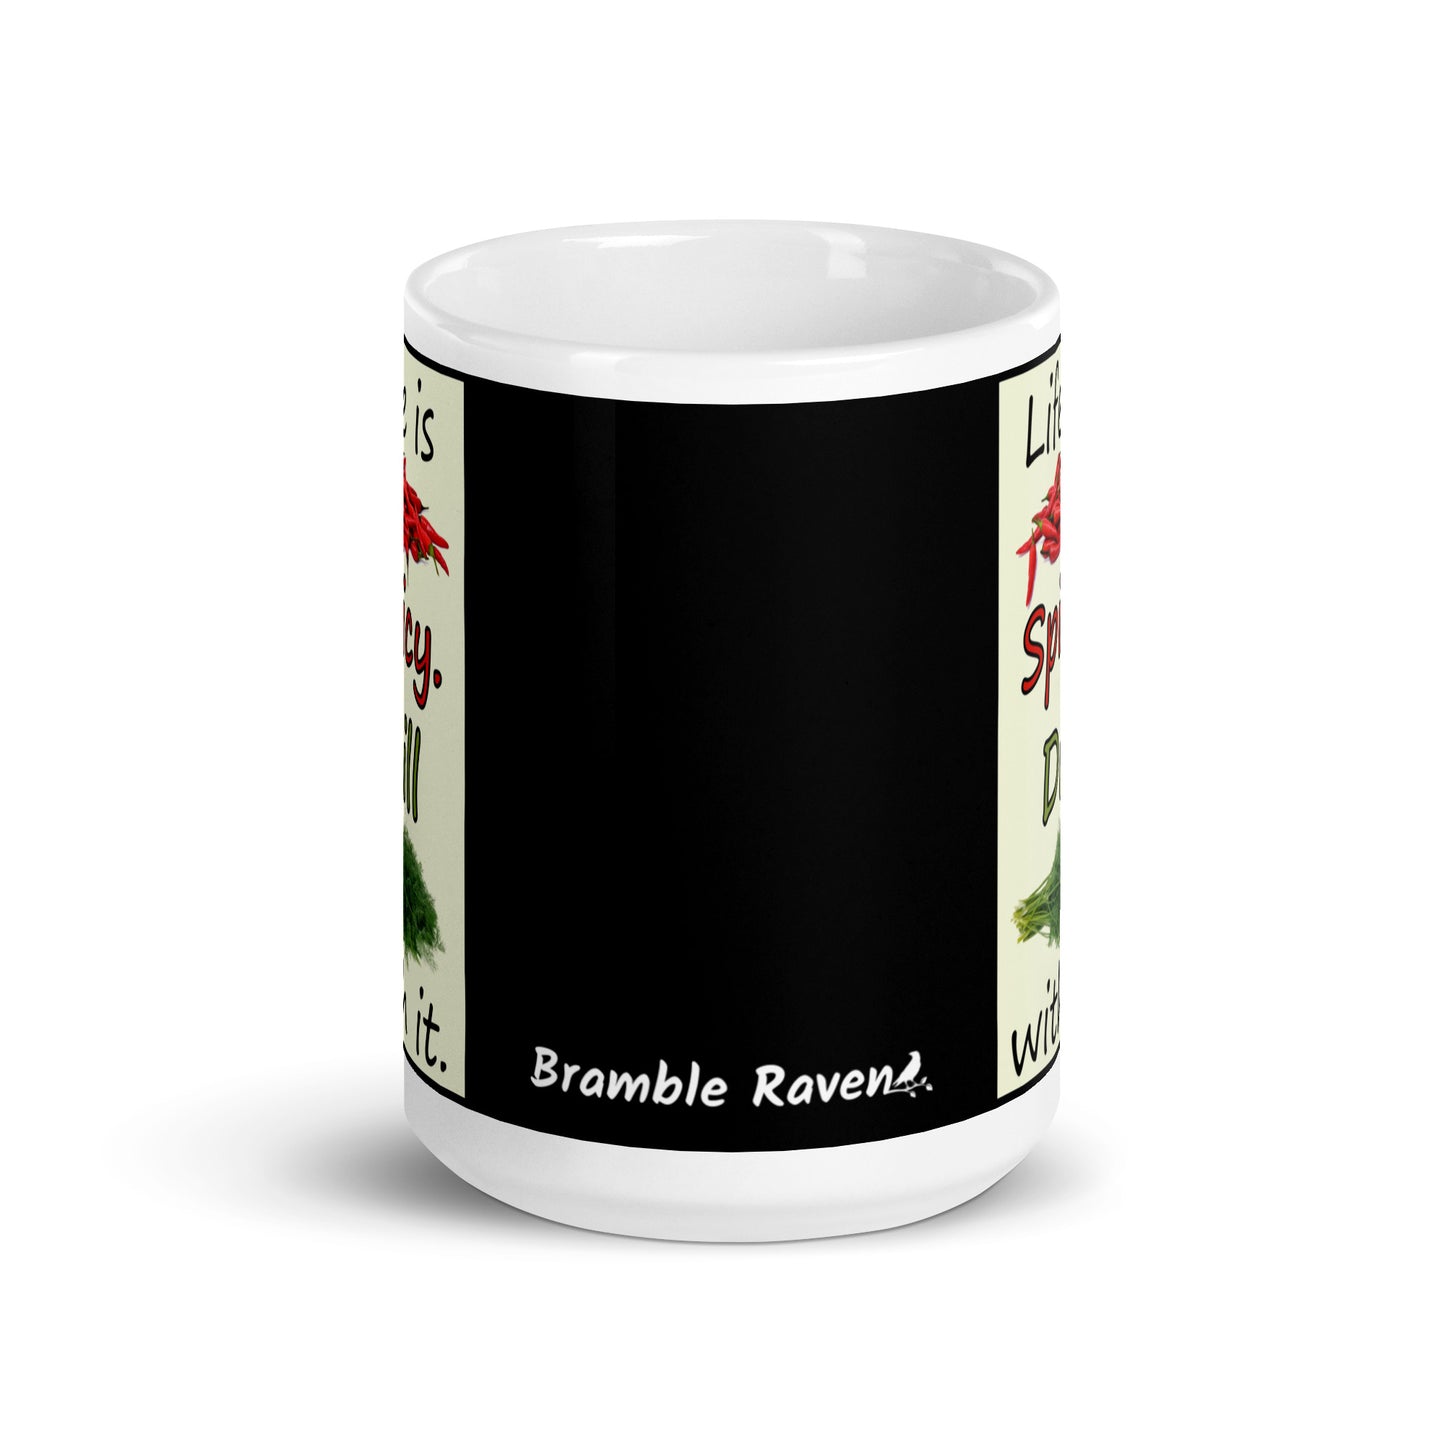 15 ounce white glossy ceramic mug. Life is Spicy. Dill with it text. Image of chili peppers and dill weed on a light yellow rectangle. Black background on mug. Front view shows white Bramble Raven logo on black background.